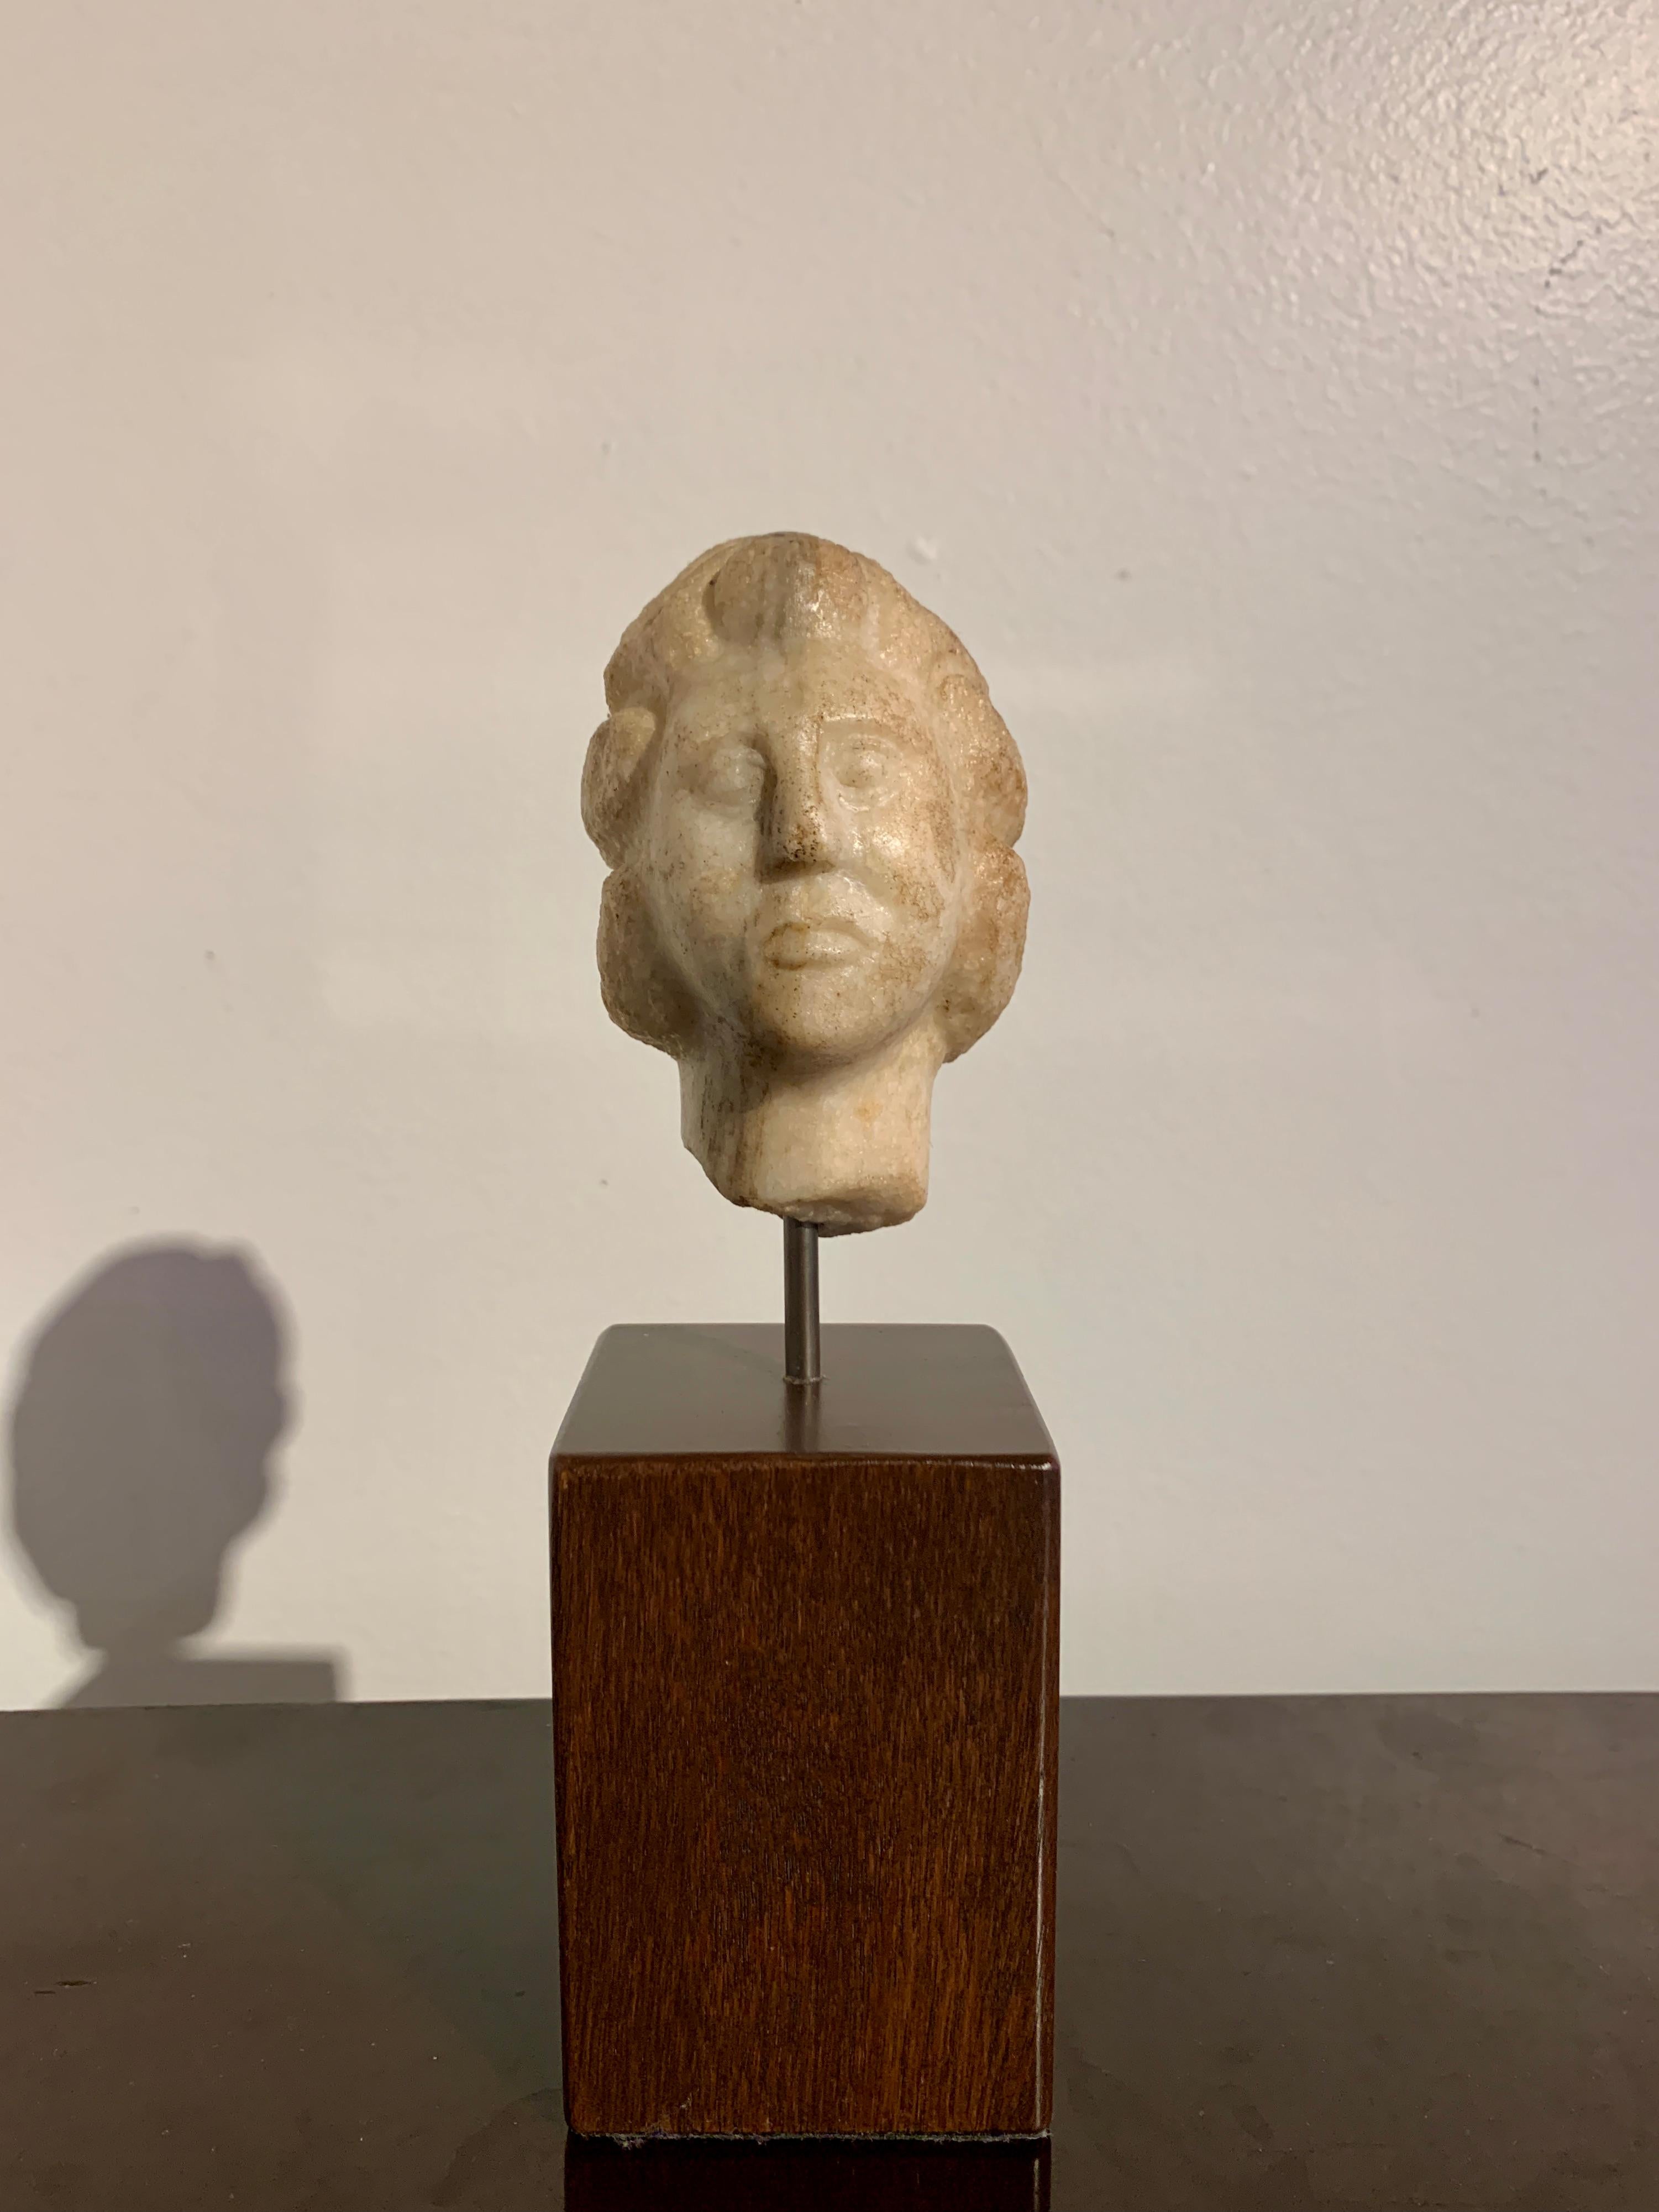 A small carved marble head of a man, Parthian Empire, Hellenistic Period, circa 2nd to 1st century BC, modern day Iran. 

The small marble head carved in the Hellenistic fashion. The man stares out from wide eyes, a solemn and soulful expression